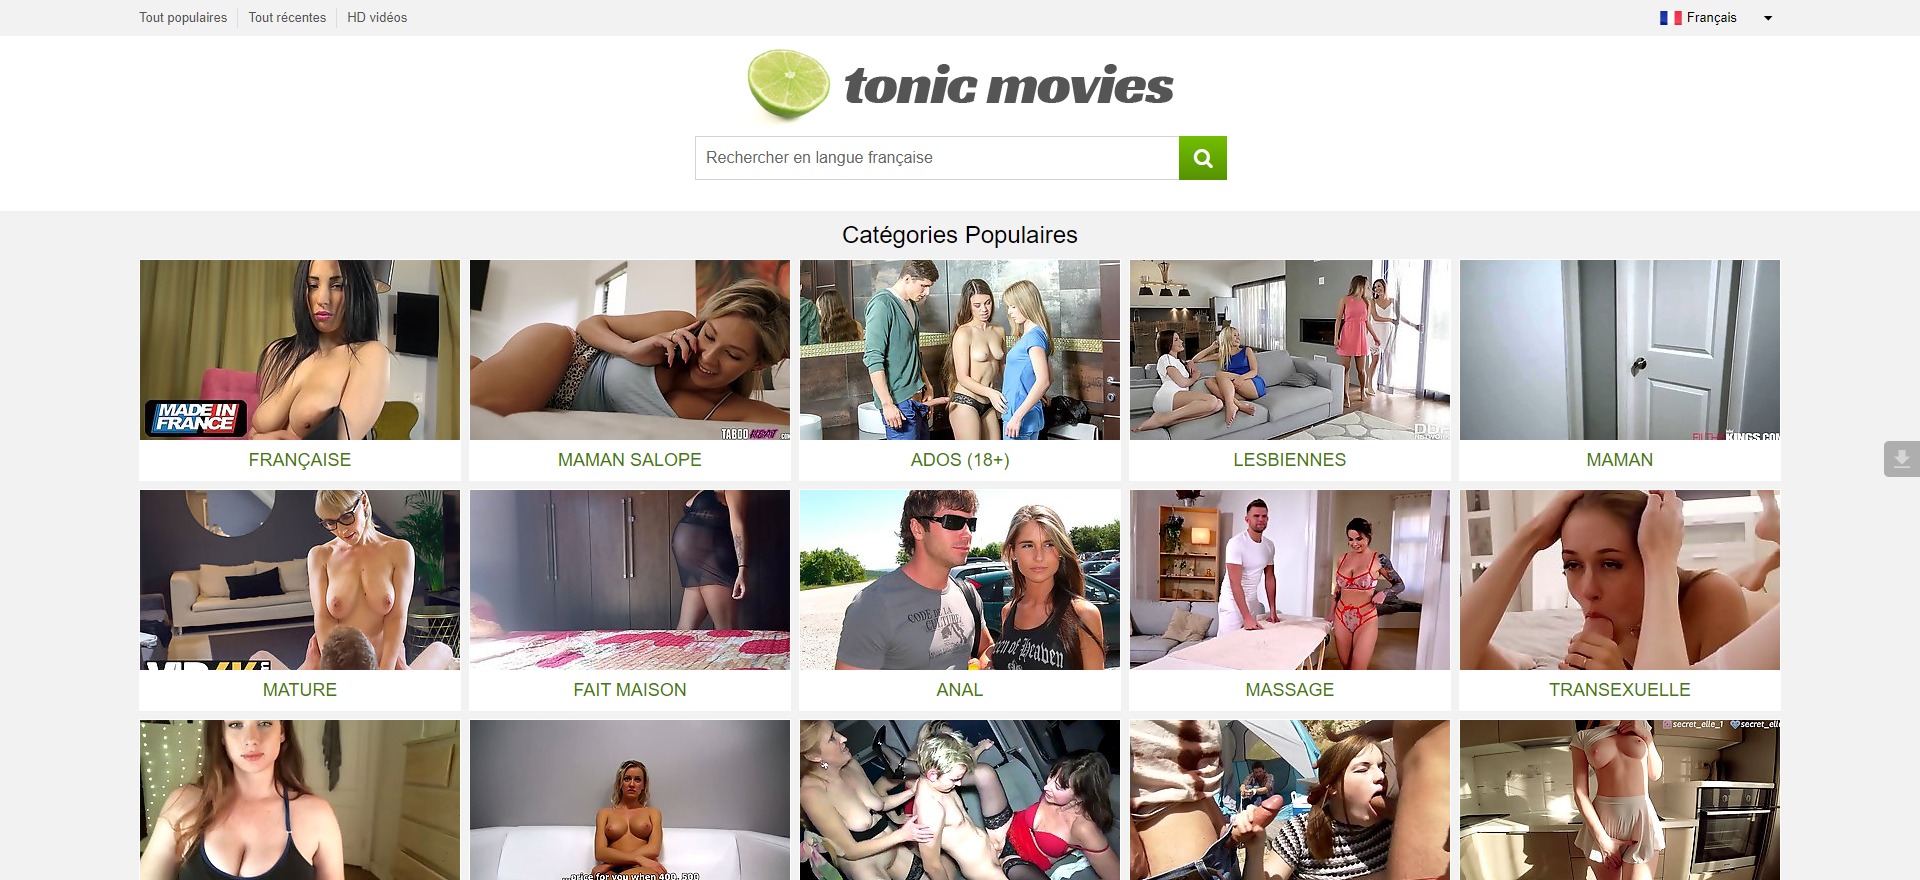 Tonicmovies: Everything You Need to Know